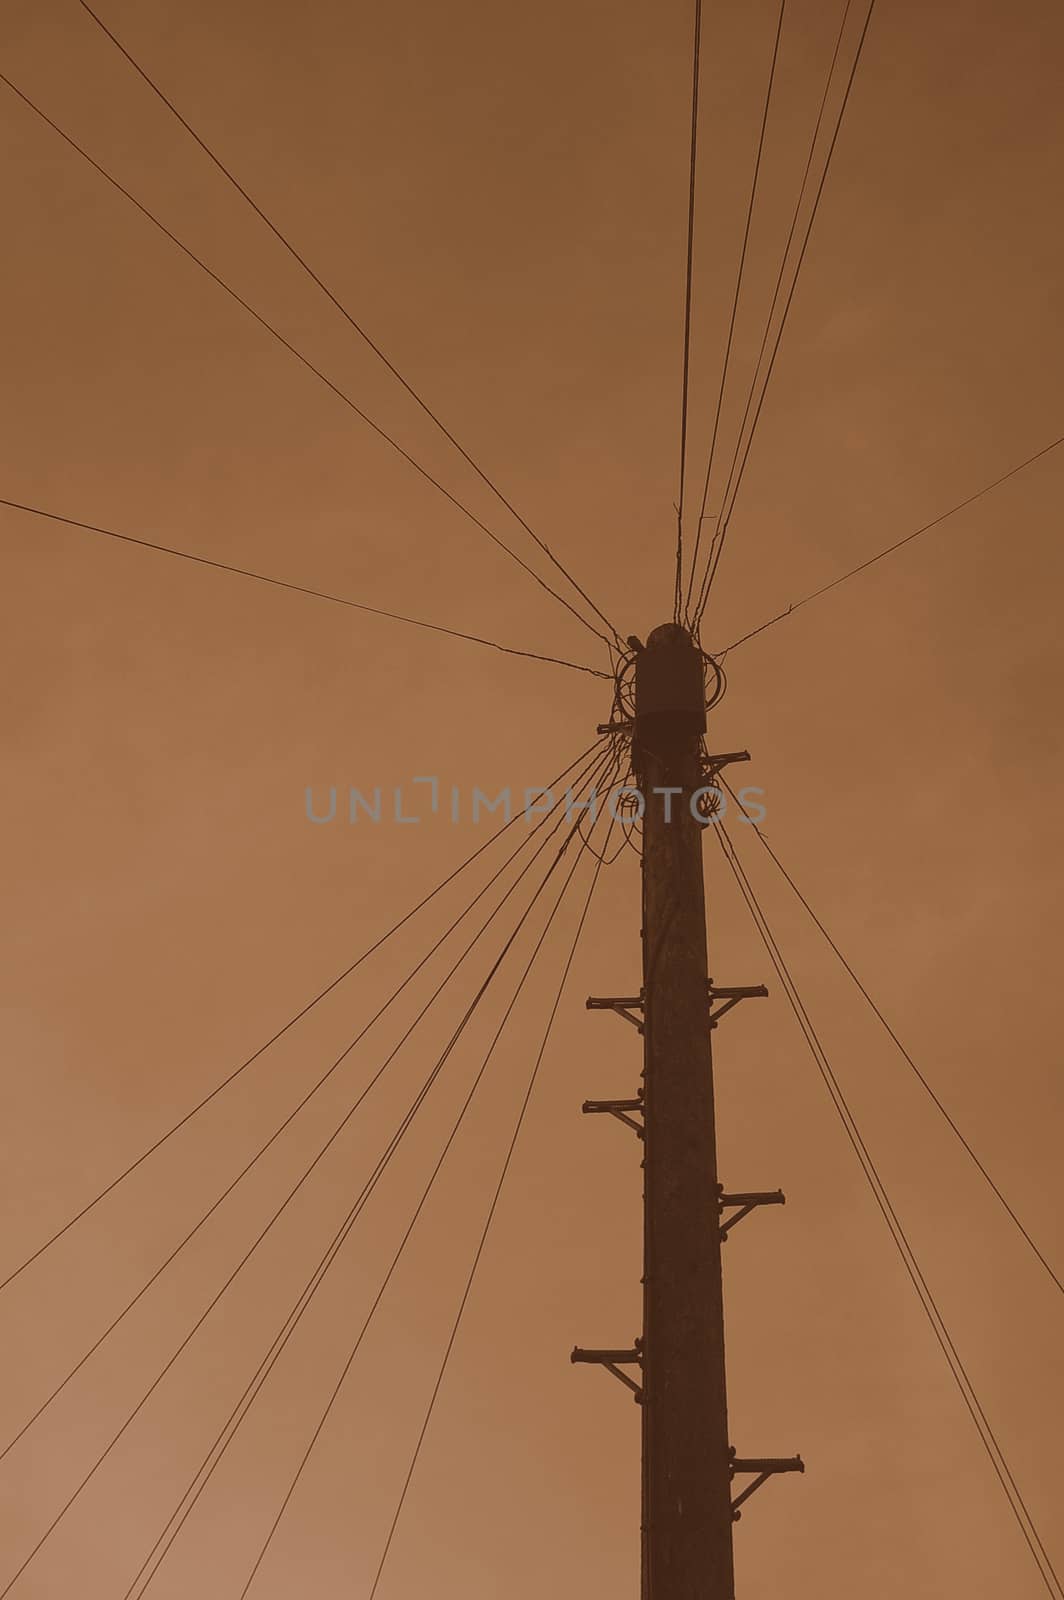 Sepia telegraph pole with numerous wires attached